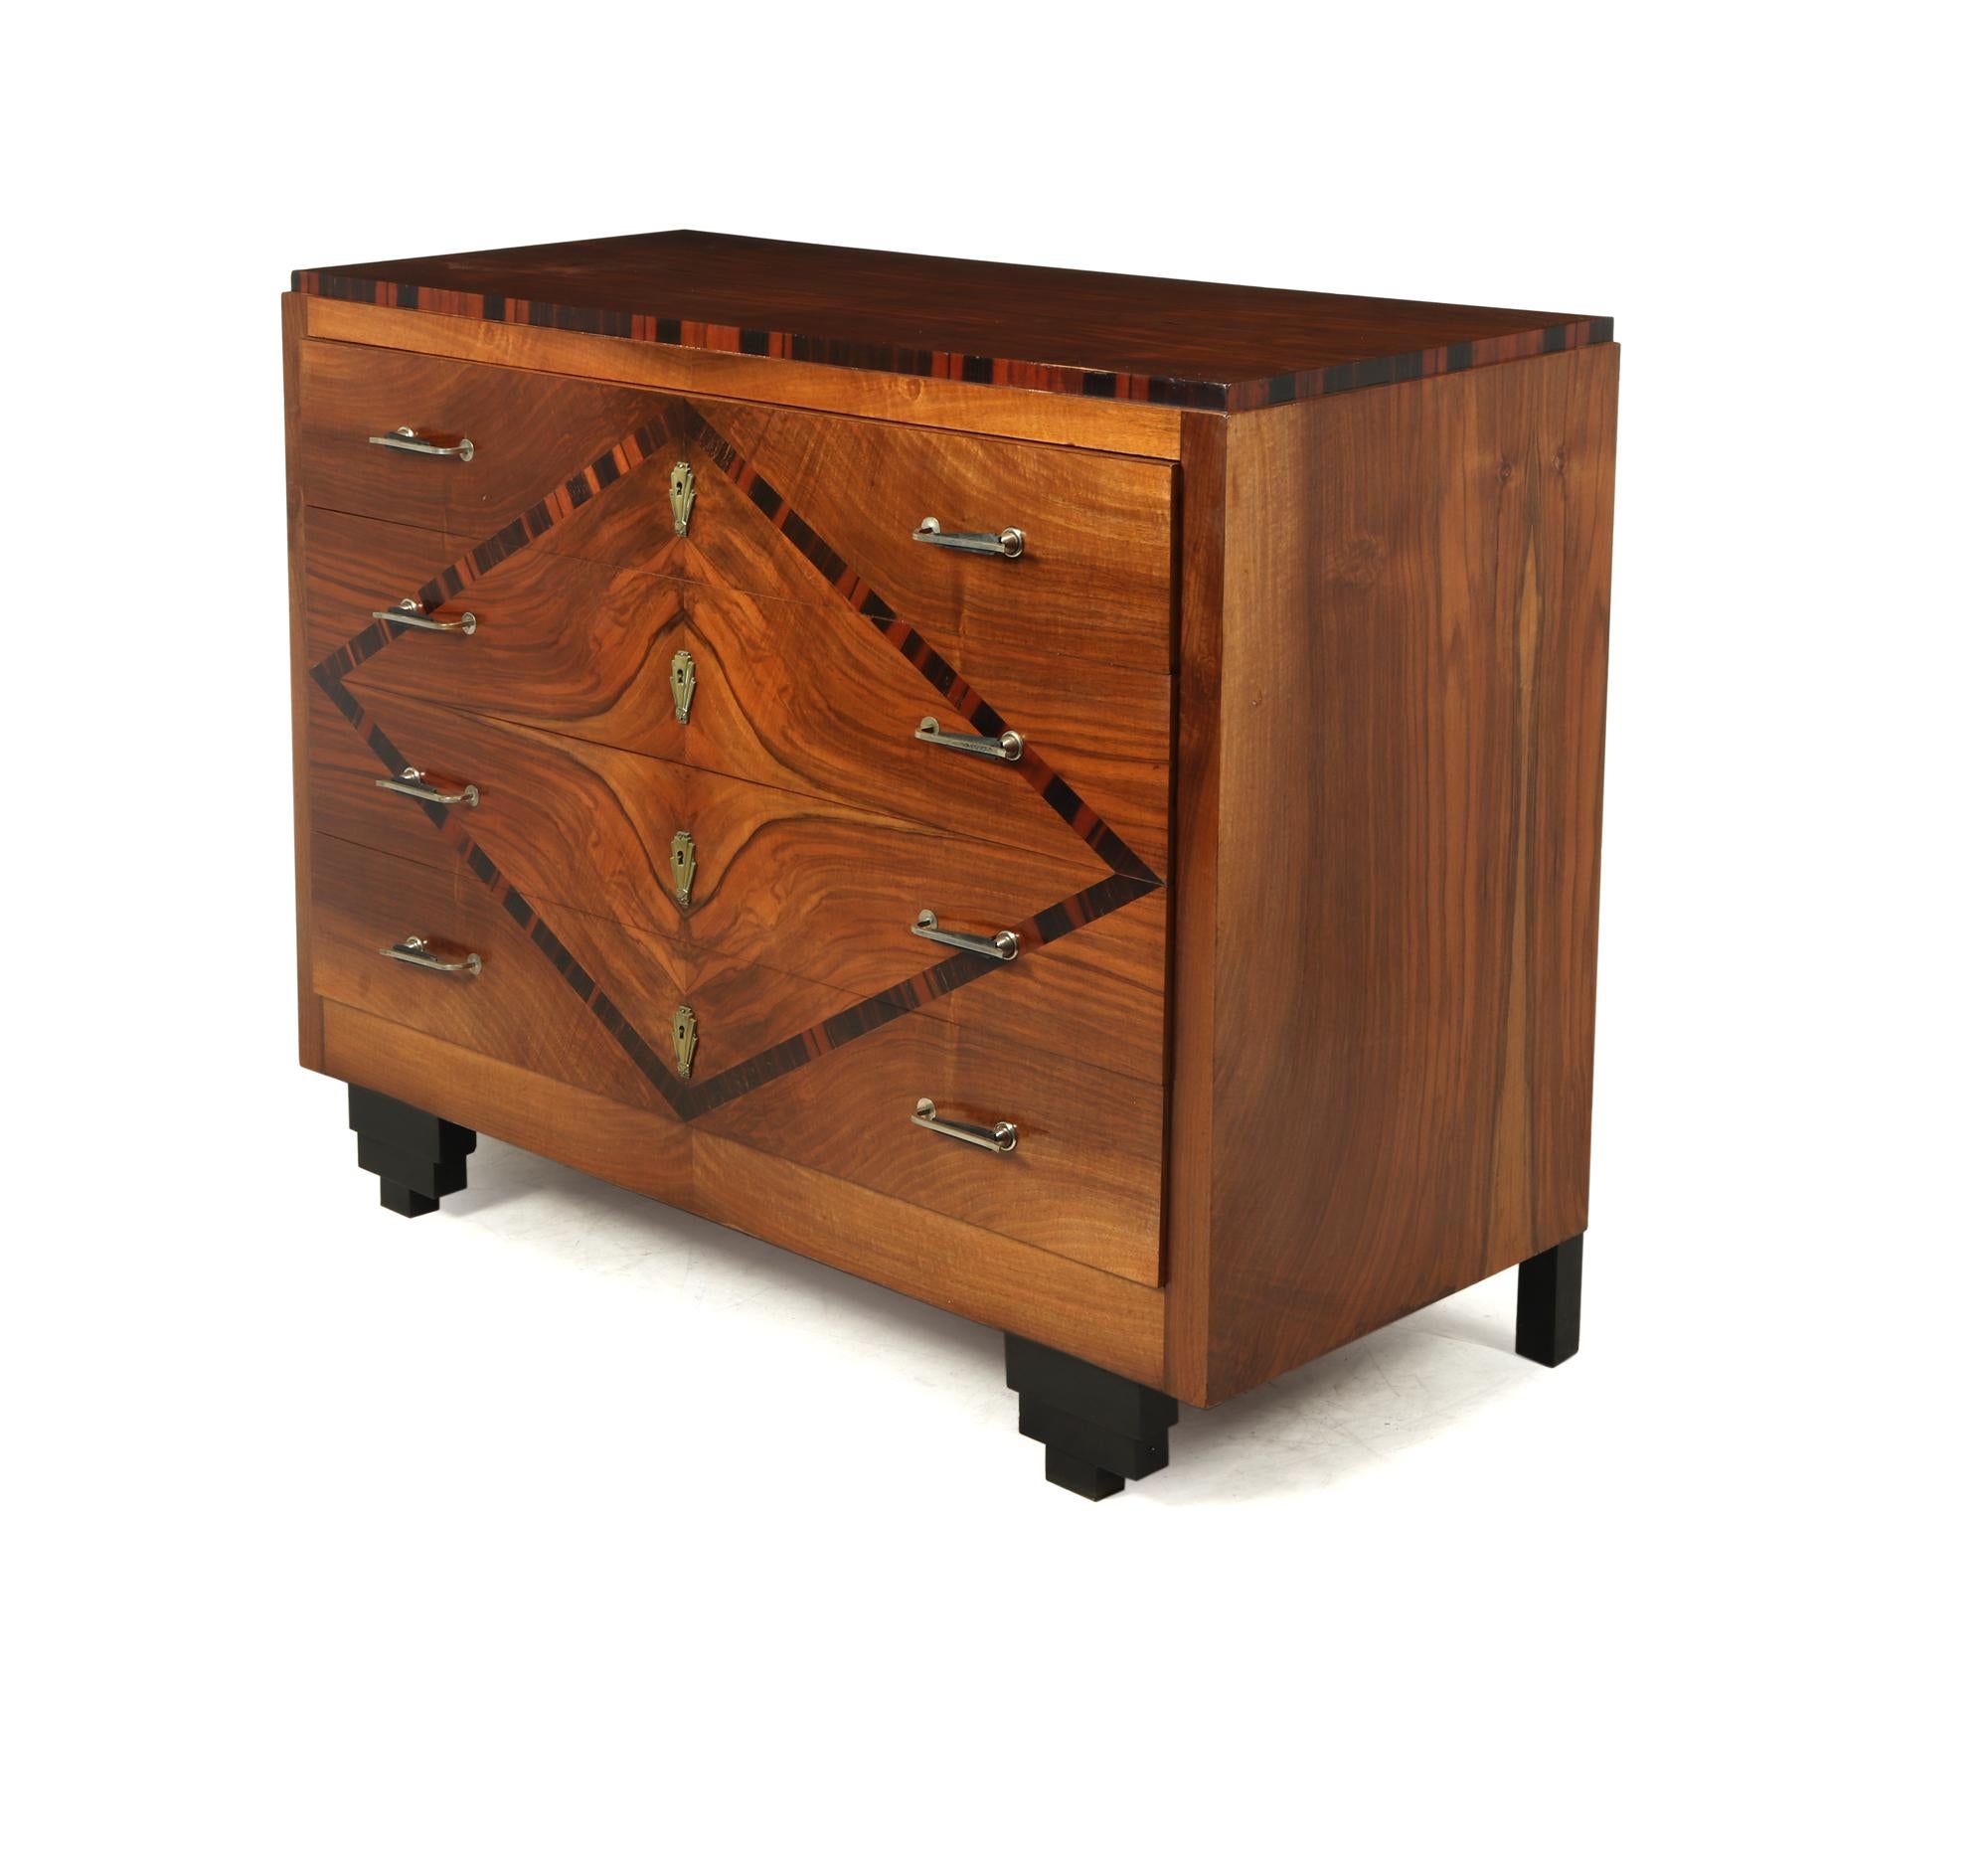 A four long drawer chest produced in Italy in the 1930’s in Walnut with Macassar Ebony cross banding and inlay the chest has been fully polished and is in excellent condition throughout

Age: 1930

Style: Art Deco

Material: Walnut and